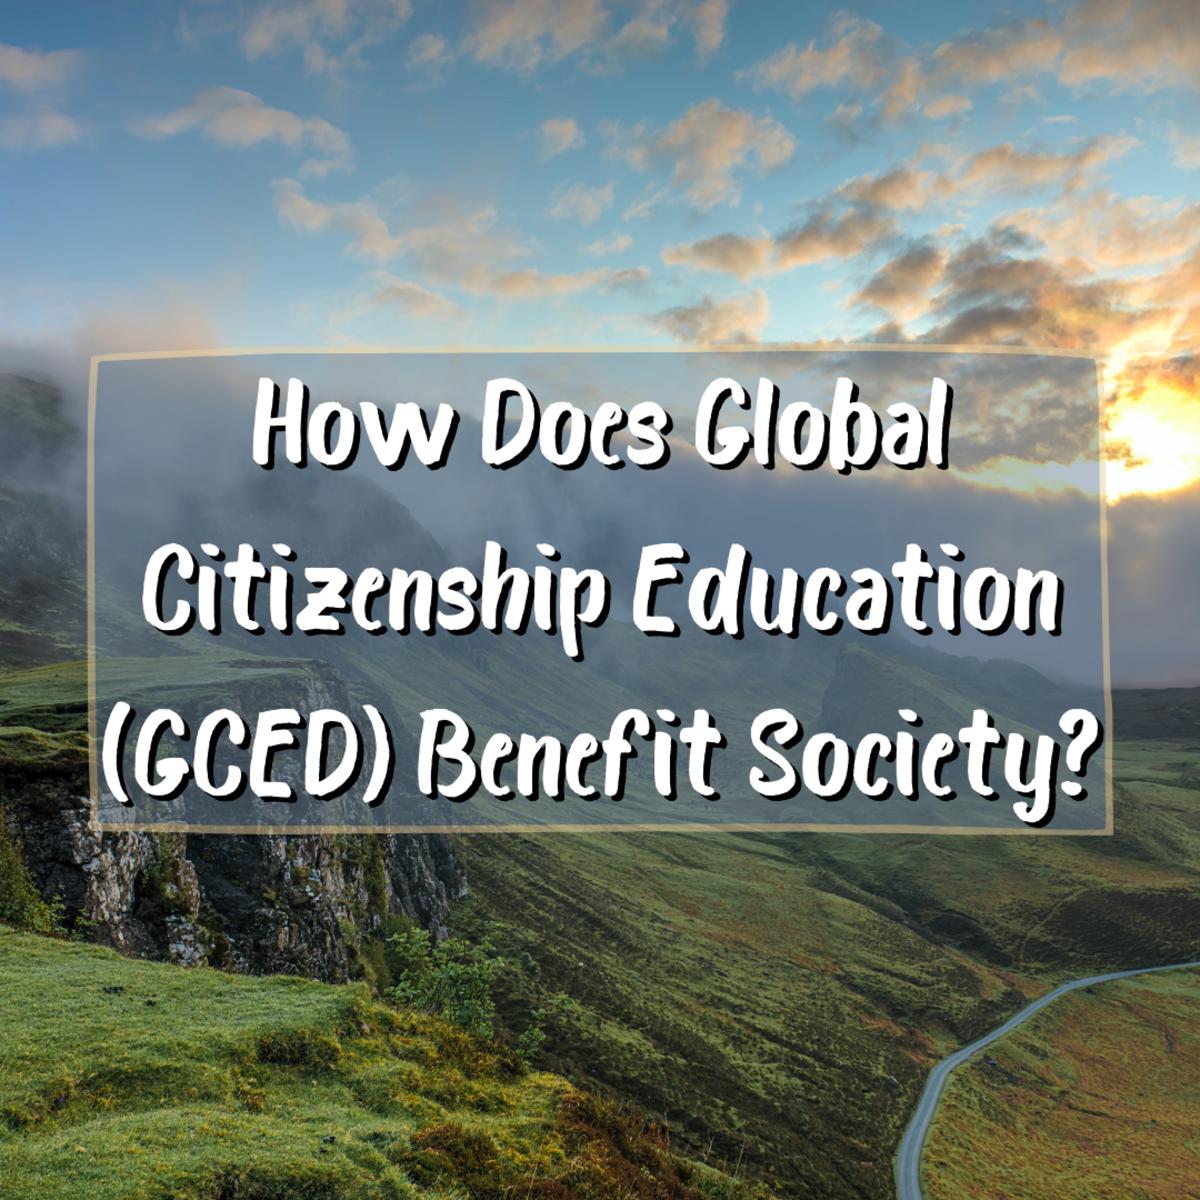 How Does Global Citizenship Education (GCED) Benefit Society?